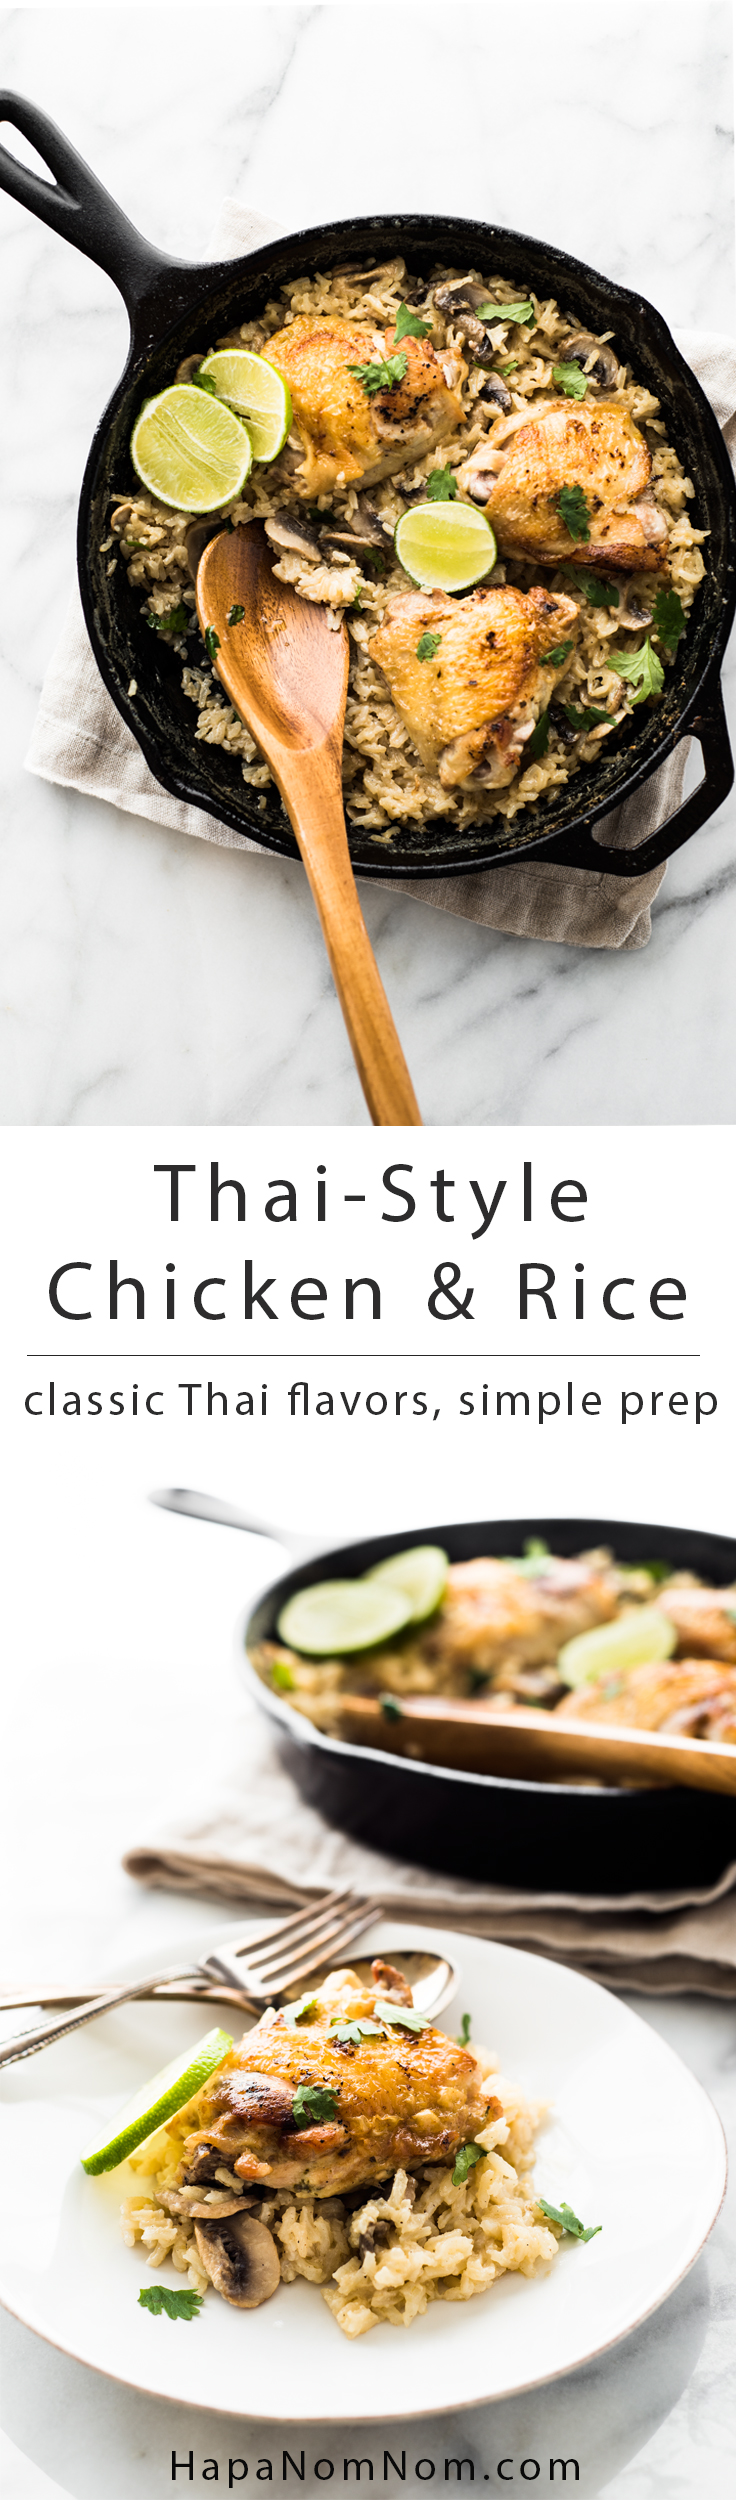 Thai Chicken and Rice - Classic Thai Flavors, Simple Prep!  Great for Weeknight Dinners!